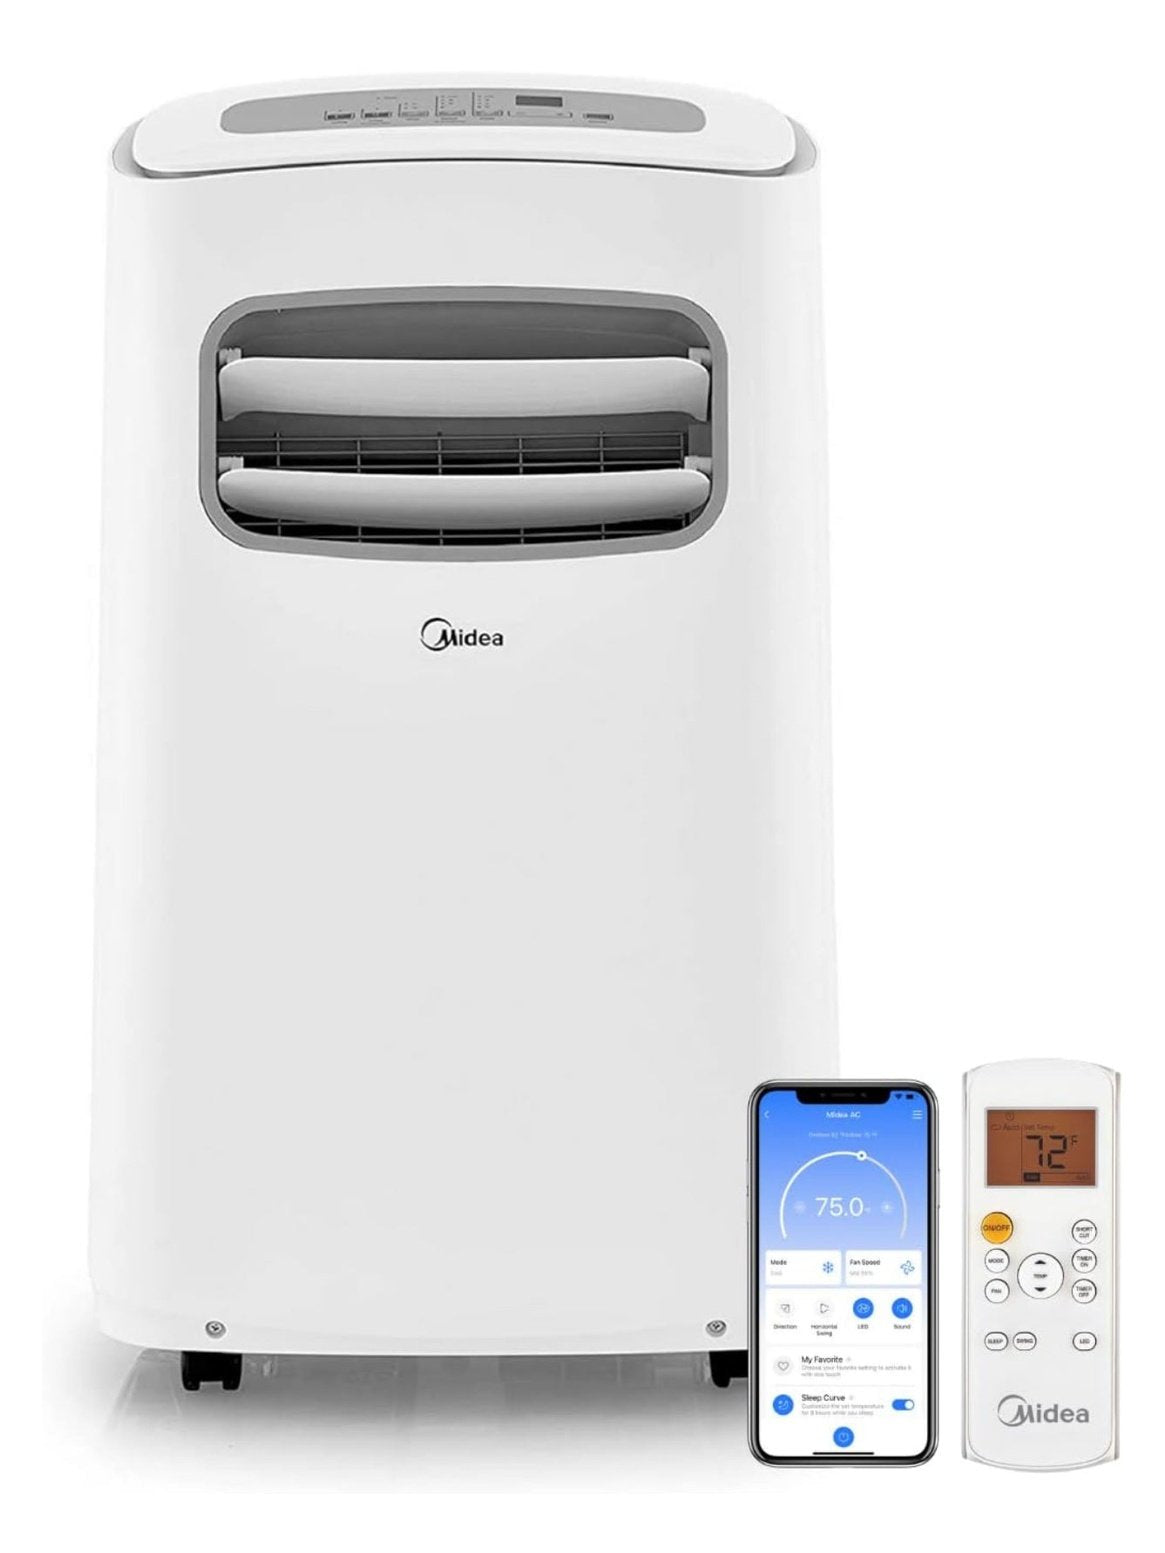 Midea 10,000 BTU ASHRAE (5,800 BTU SACC) Portable Air Conditioner, Cools up to 200 Sq. Ft., with Dehumidifier & Fan mode, Control with Remote, Amazon Alexa & Google Assistant, Easy-to-use and Install